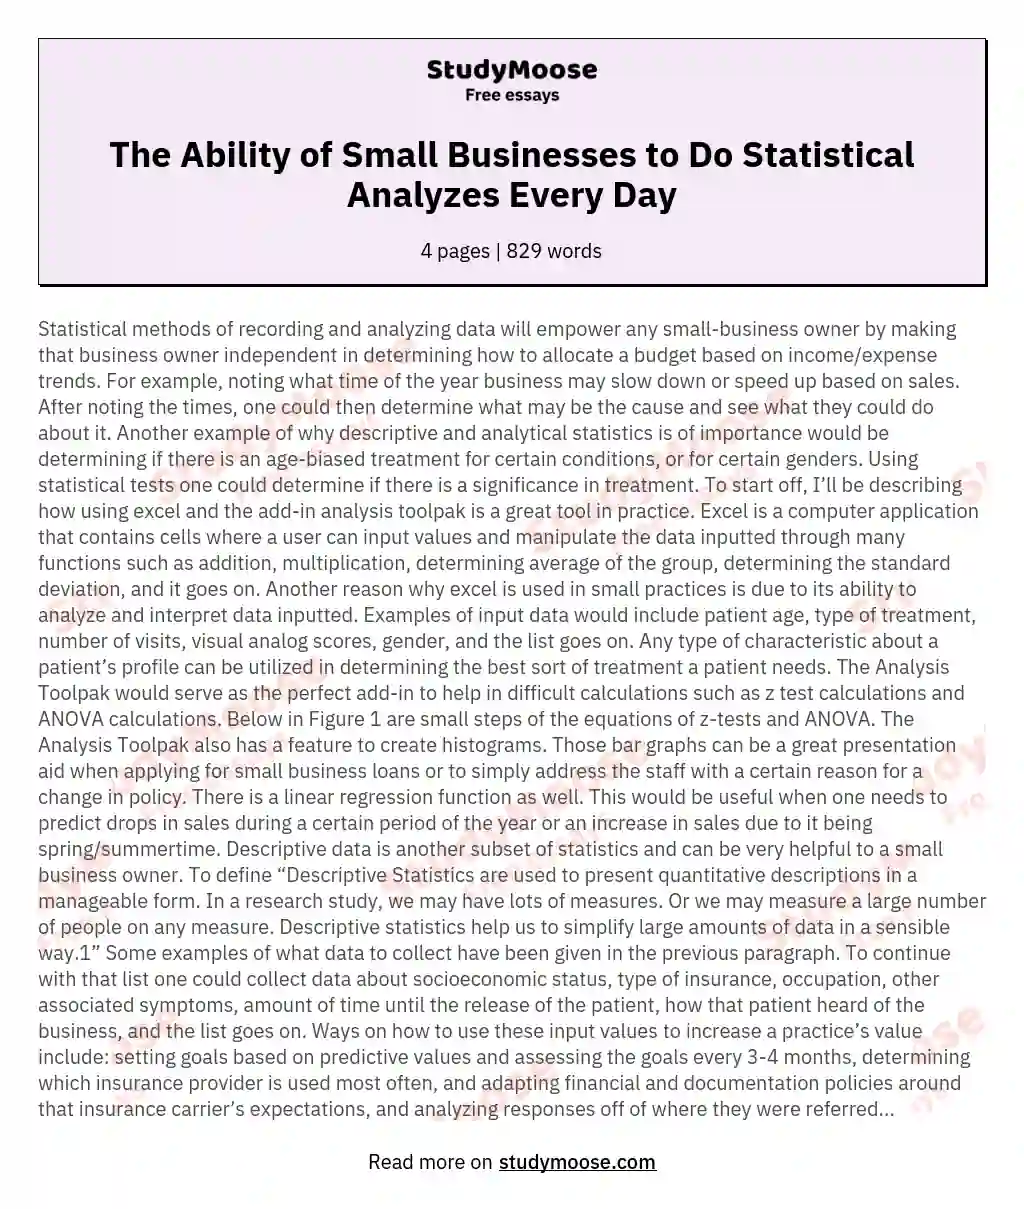 The Ability of Small Businesses to Do Statistical Analyzes Every Day essay